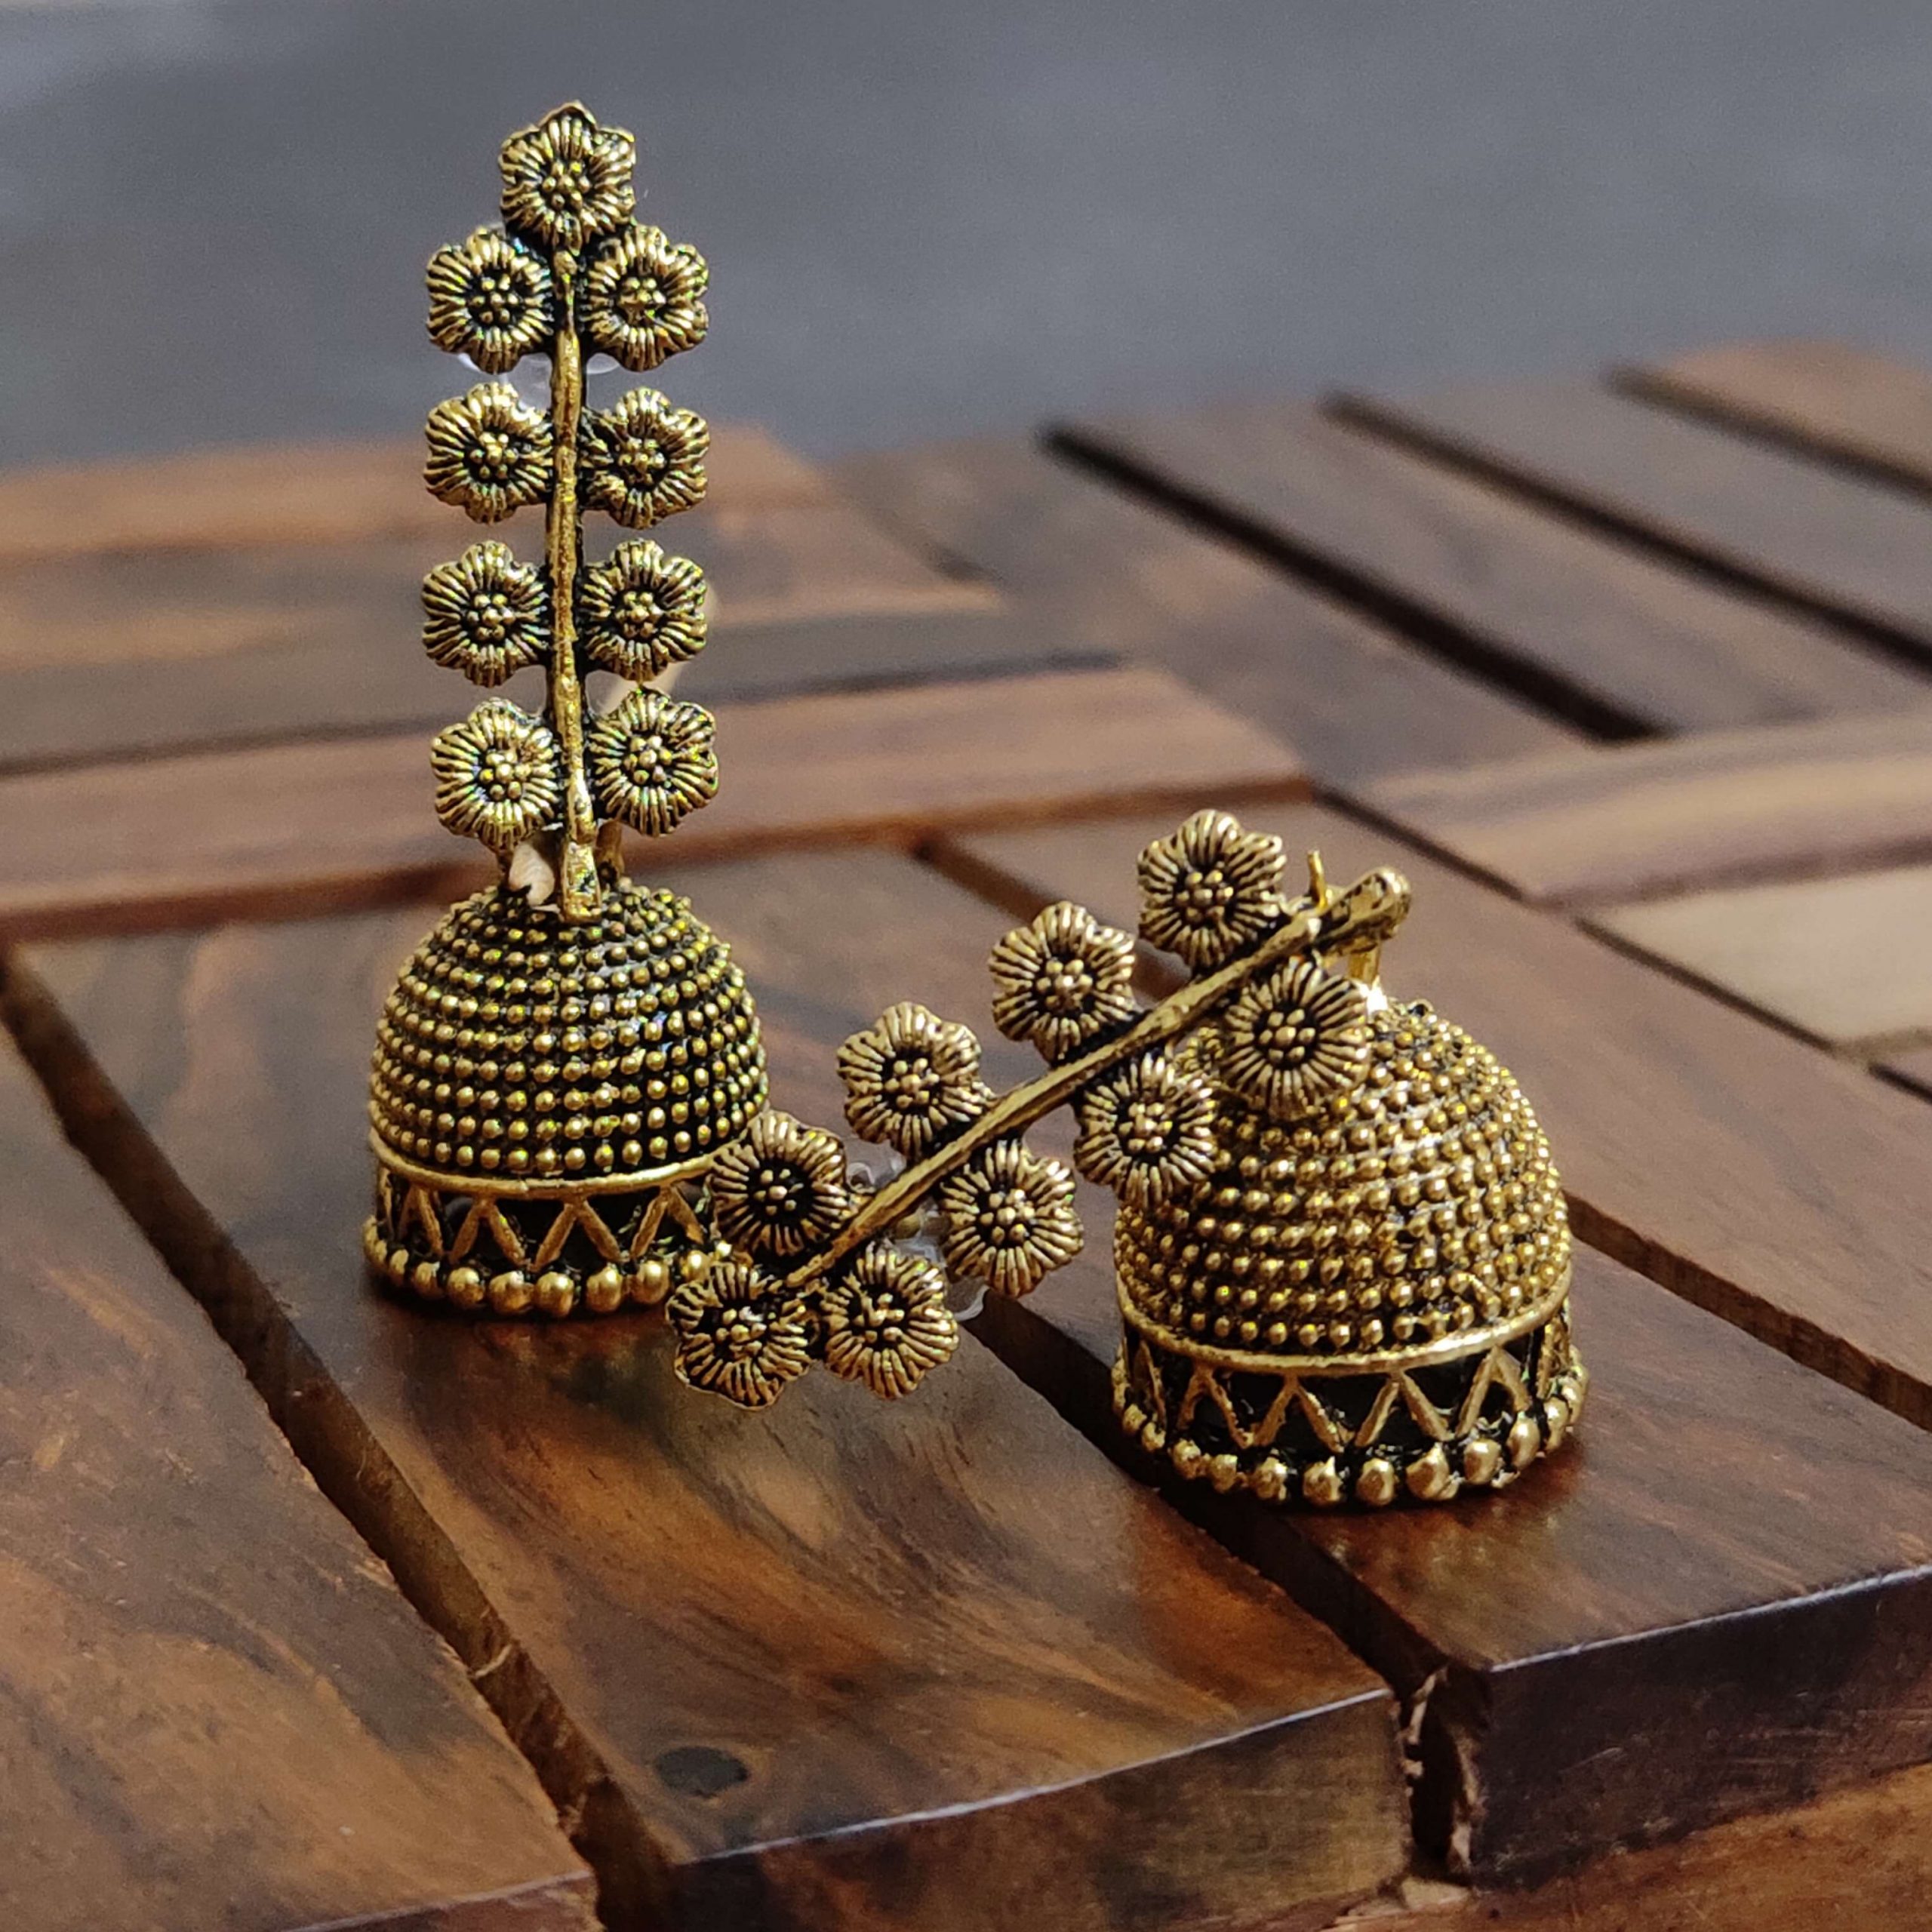 Trendy Earrings Online | Shop Latest and Stylish Earrings at GurlyPick